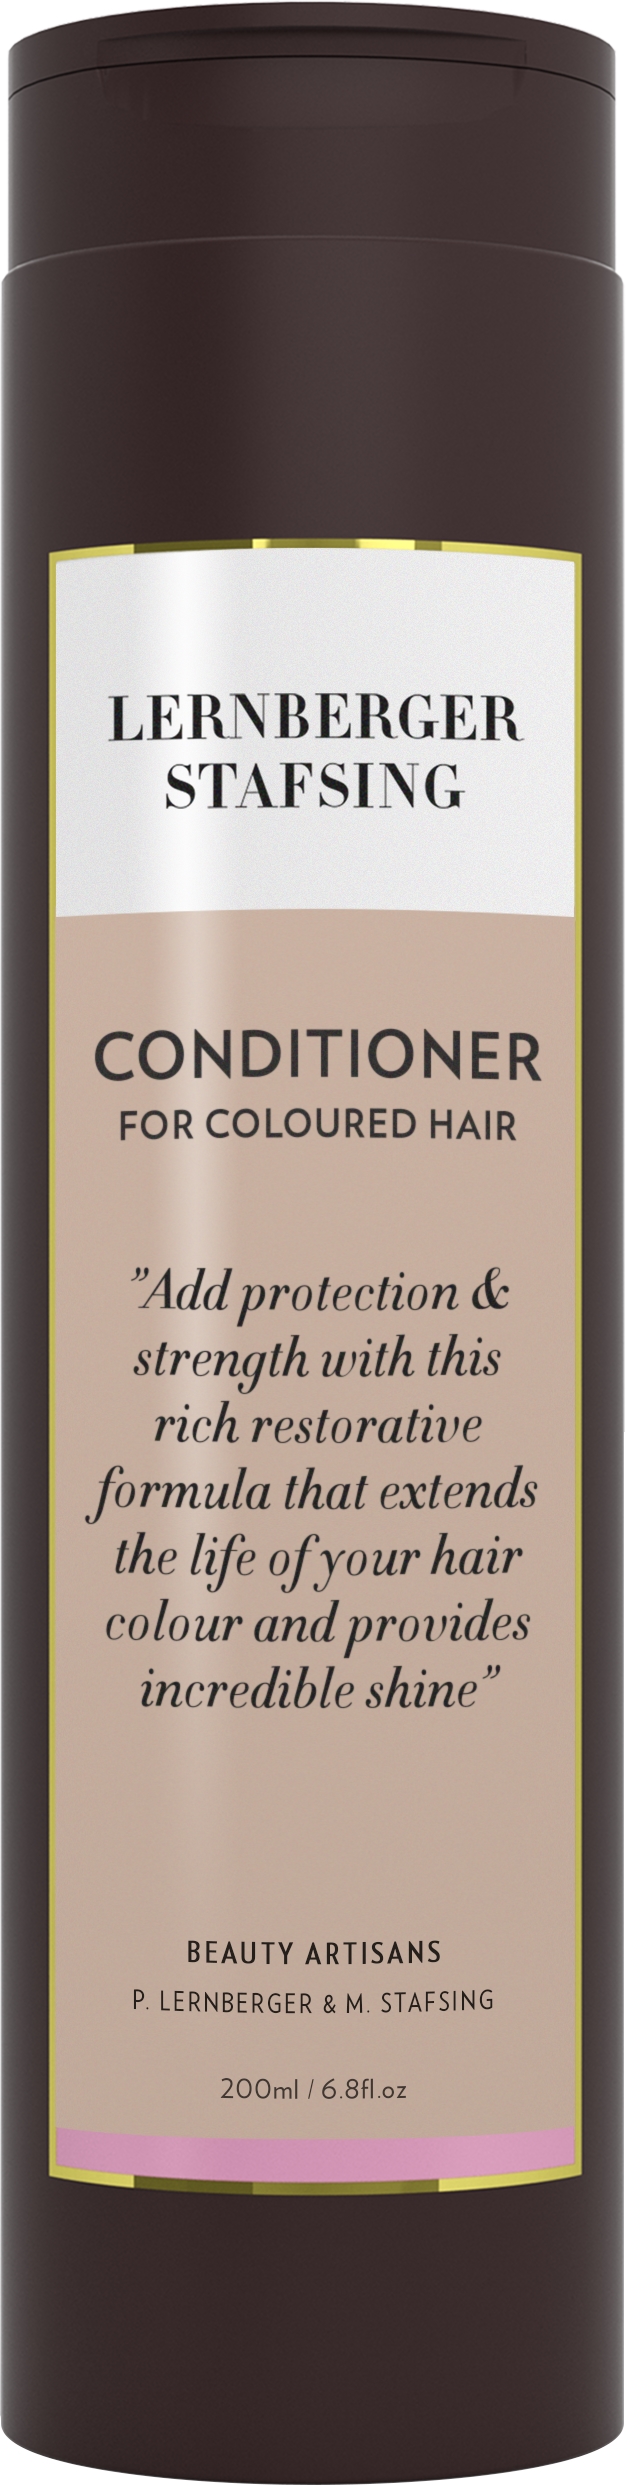  For Coloured Hair Conditioner